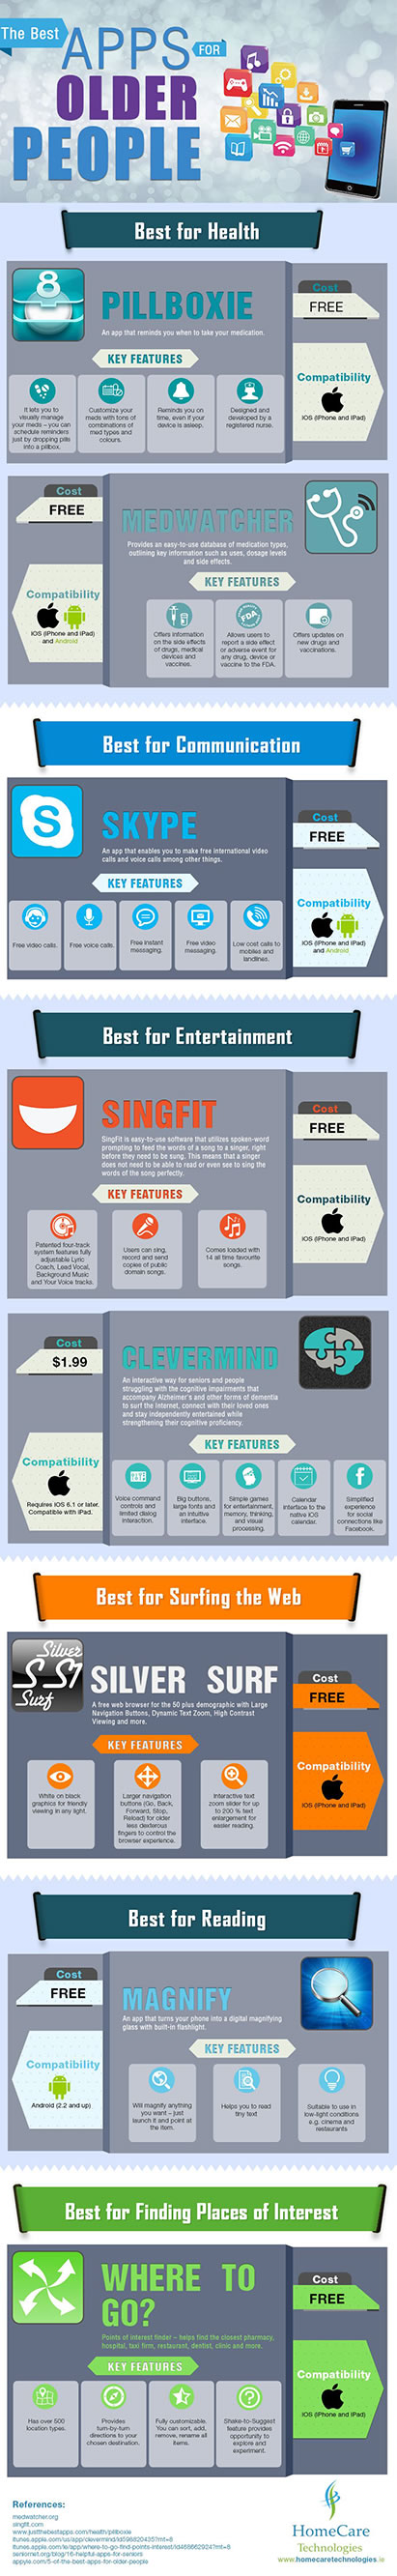 Apps for older people - infographic